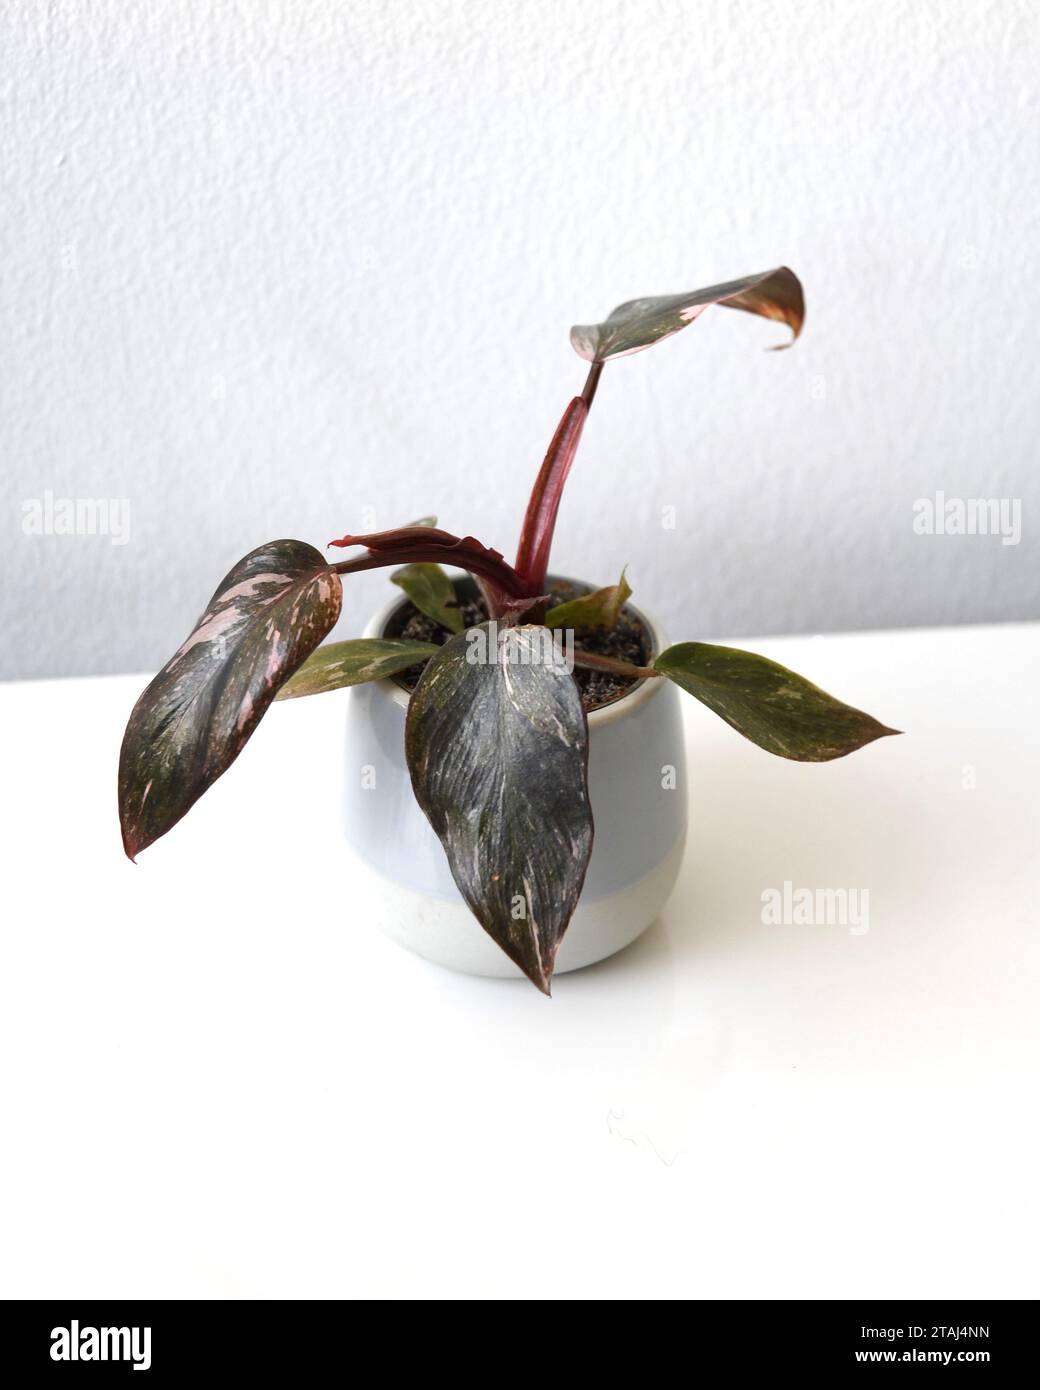 Philodendron erubescens 'pink princess' houseplant, with green and pink heart shaped leaves, in a ceramic pot. Isolated on a white background. Stock Photo